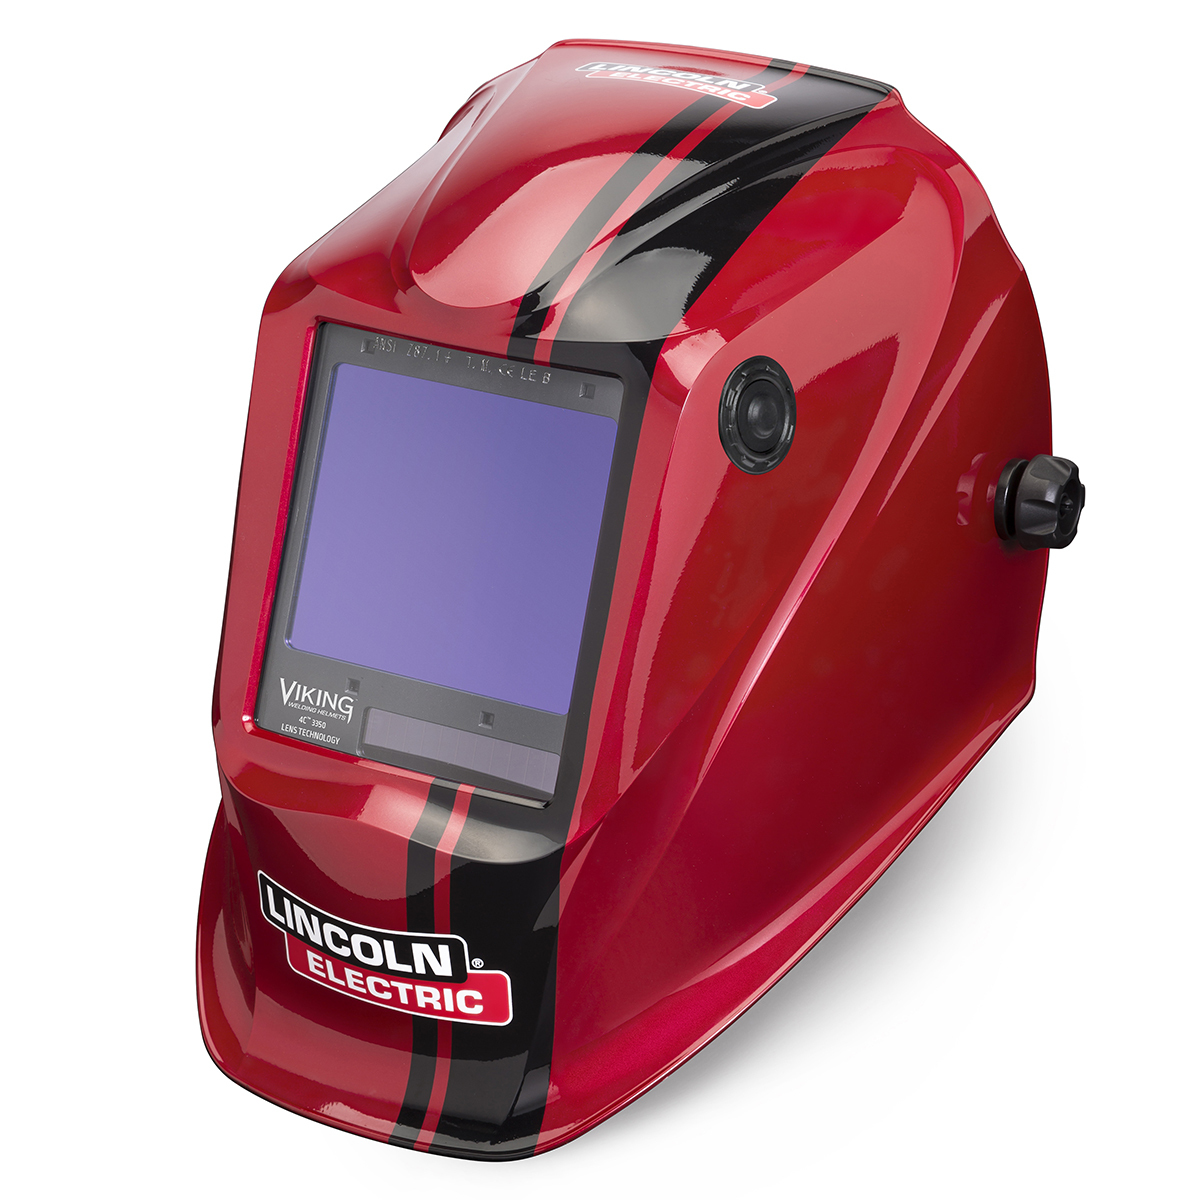 Lincoln Electric® VIKING® 3350 Red/Black Welding Helmet With Variable Shades 5 - 13 Auto Darkening Lens, 4C® Lens Technology And